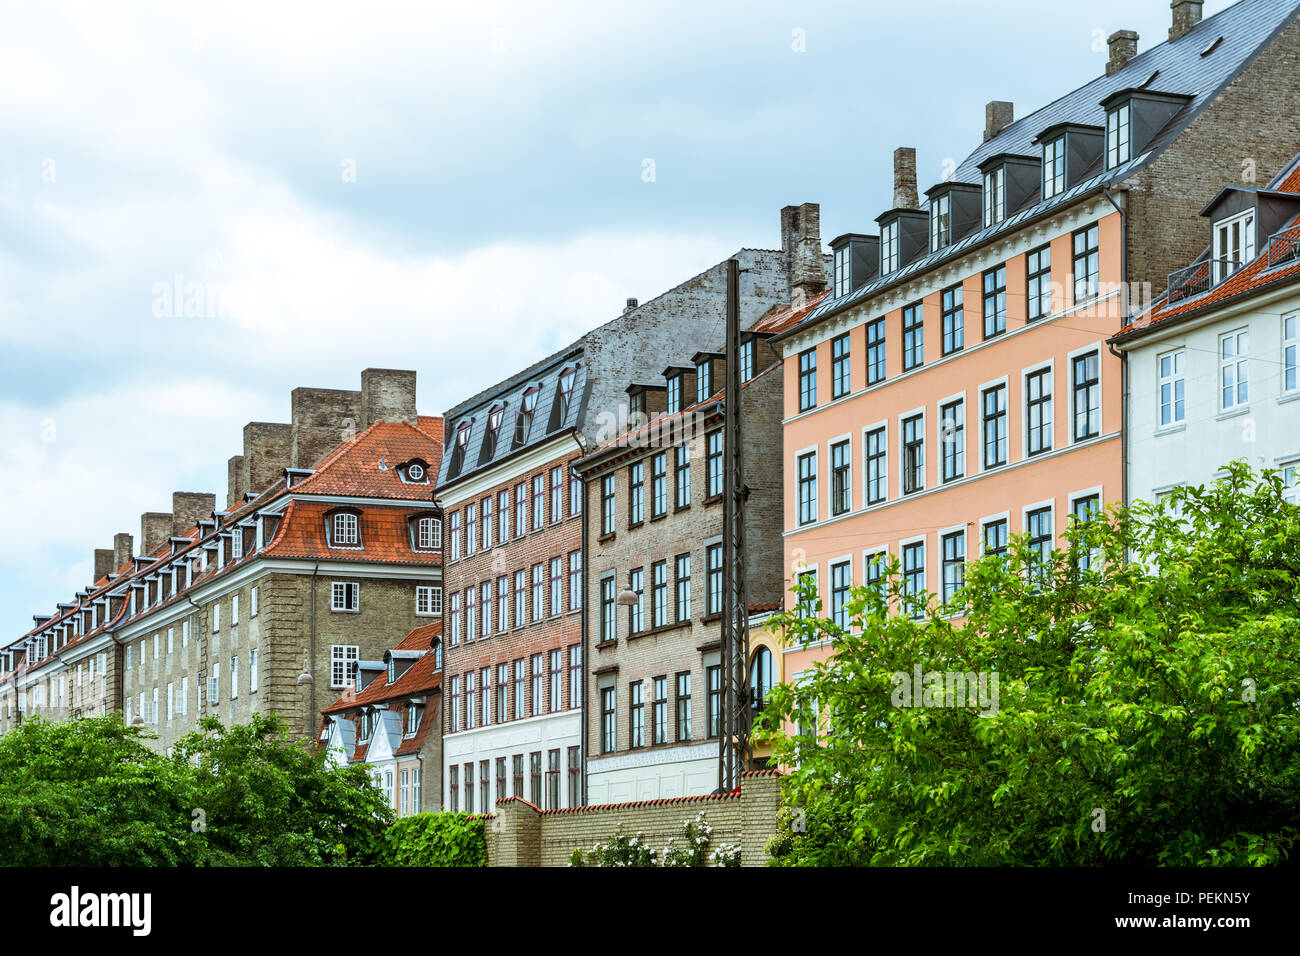 A row of colourful houses, in copenhagan, denmark, on a cloudy day Stock Photo